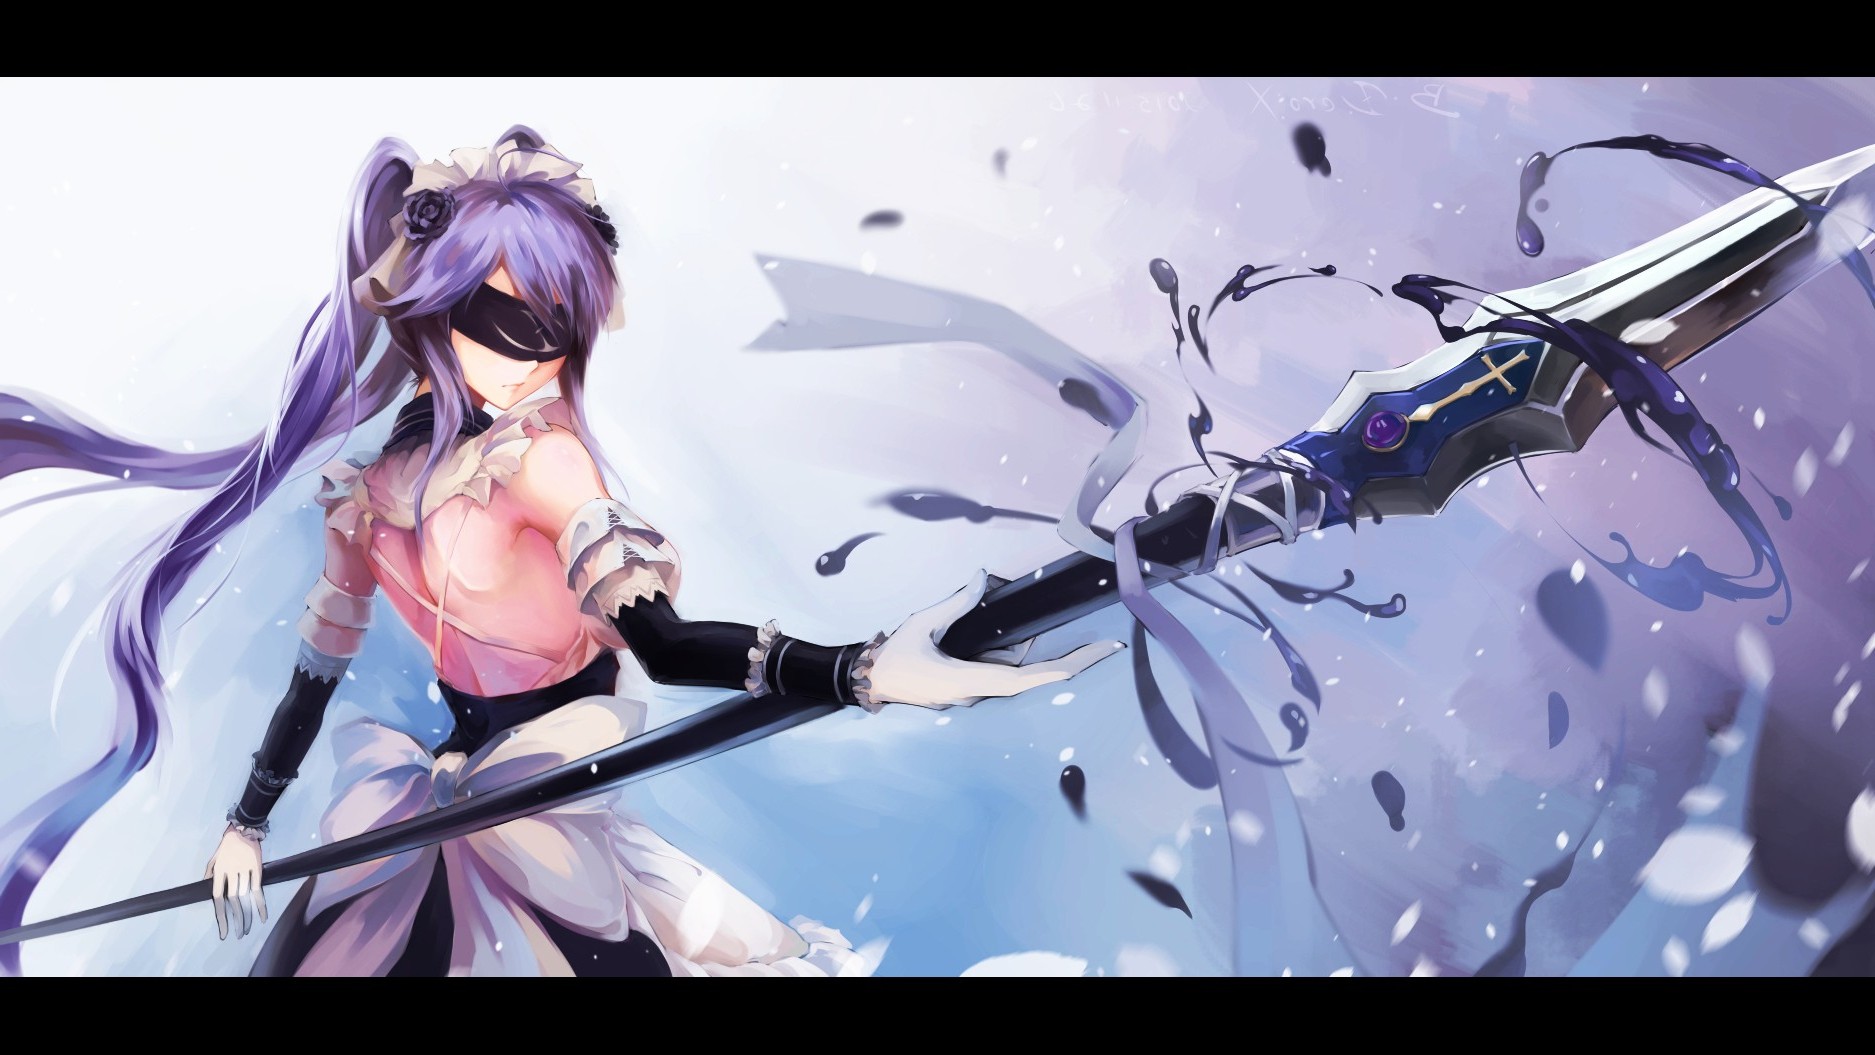 Anime Anime Girls Blindfold Spear Weapon Purple Hair Images, Photos, Reviews